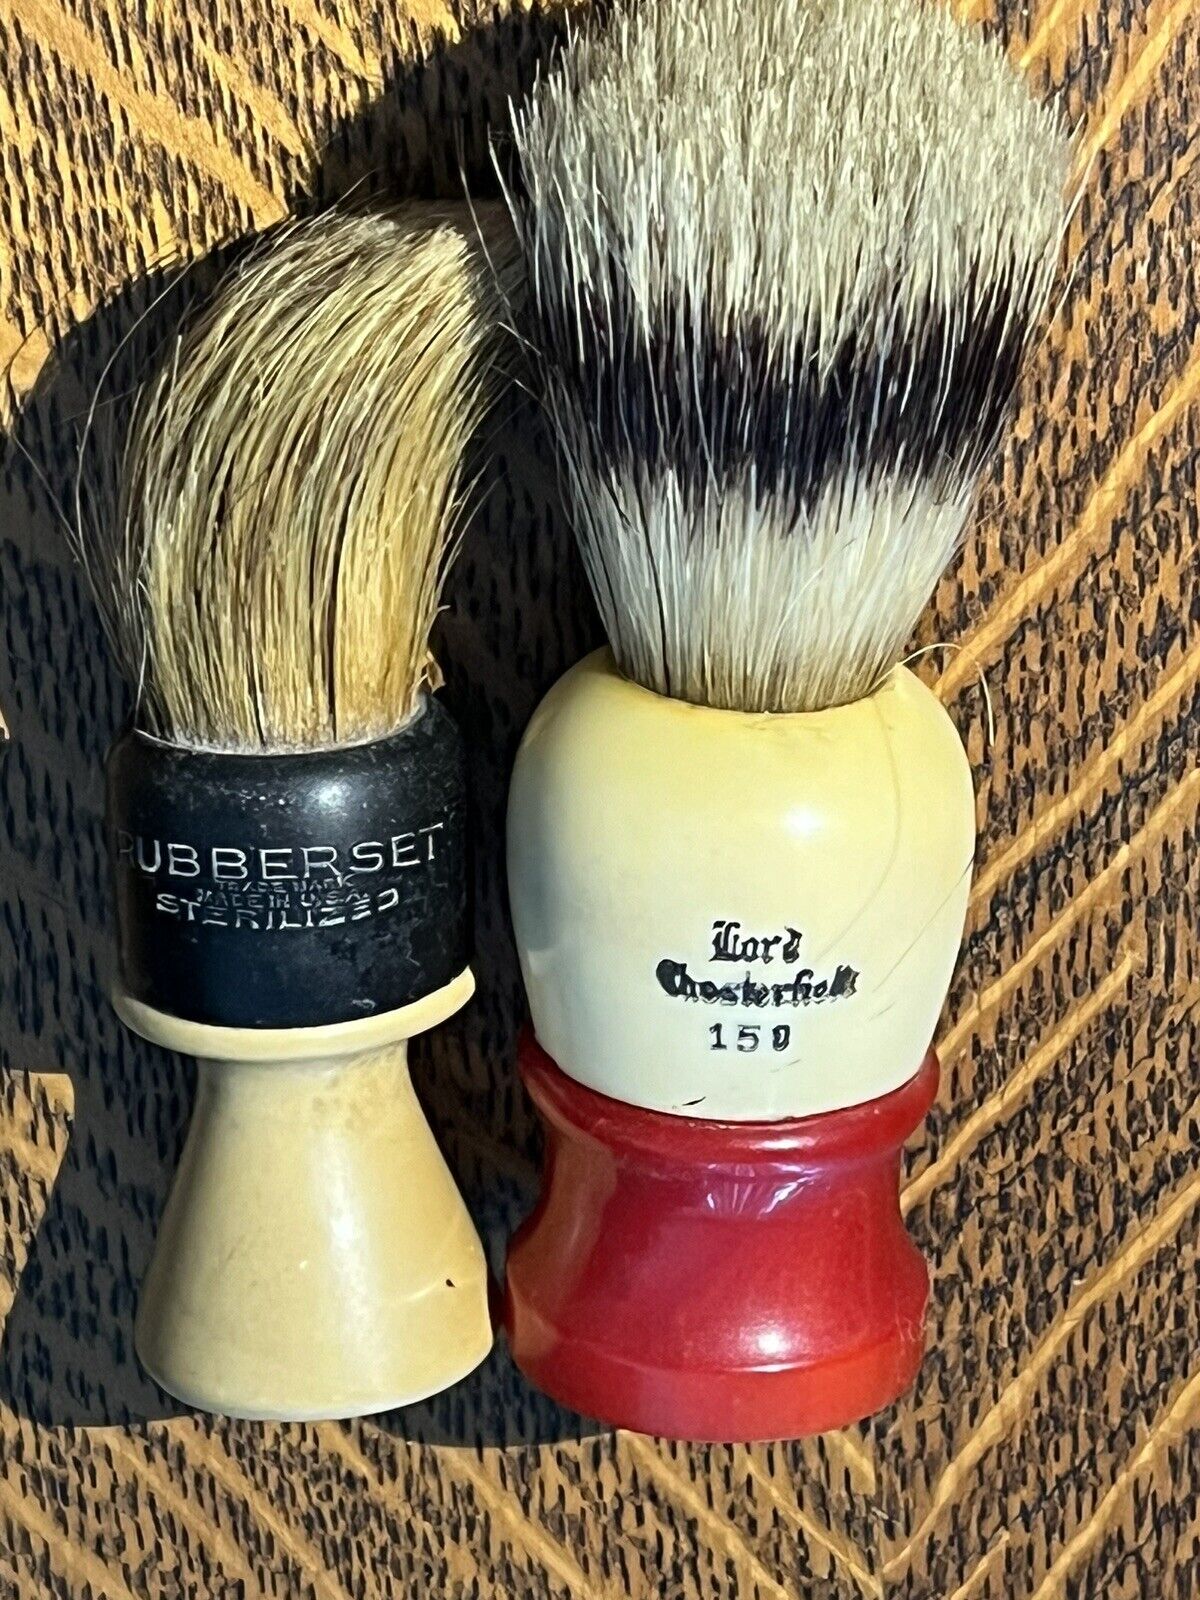 Vintage Shaving Brushes Rubberset/Lord Chesterfield